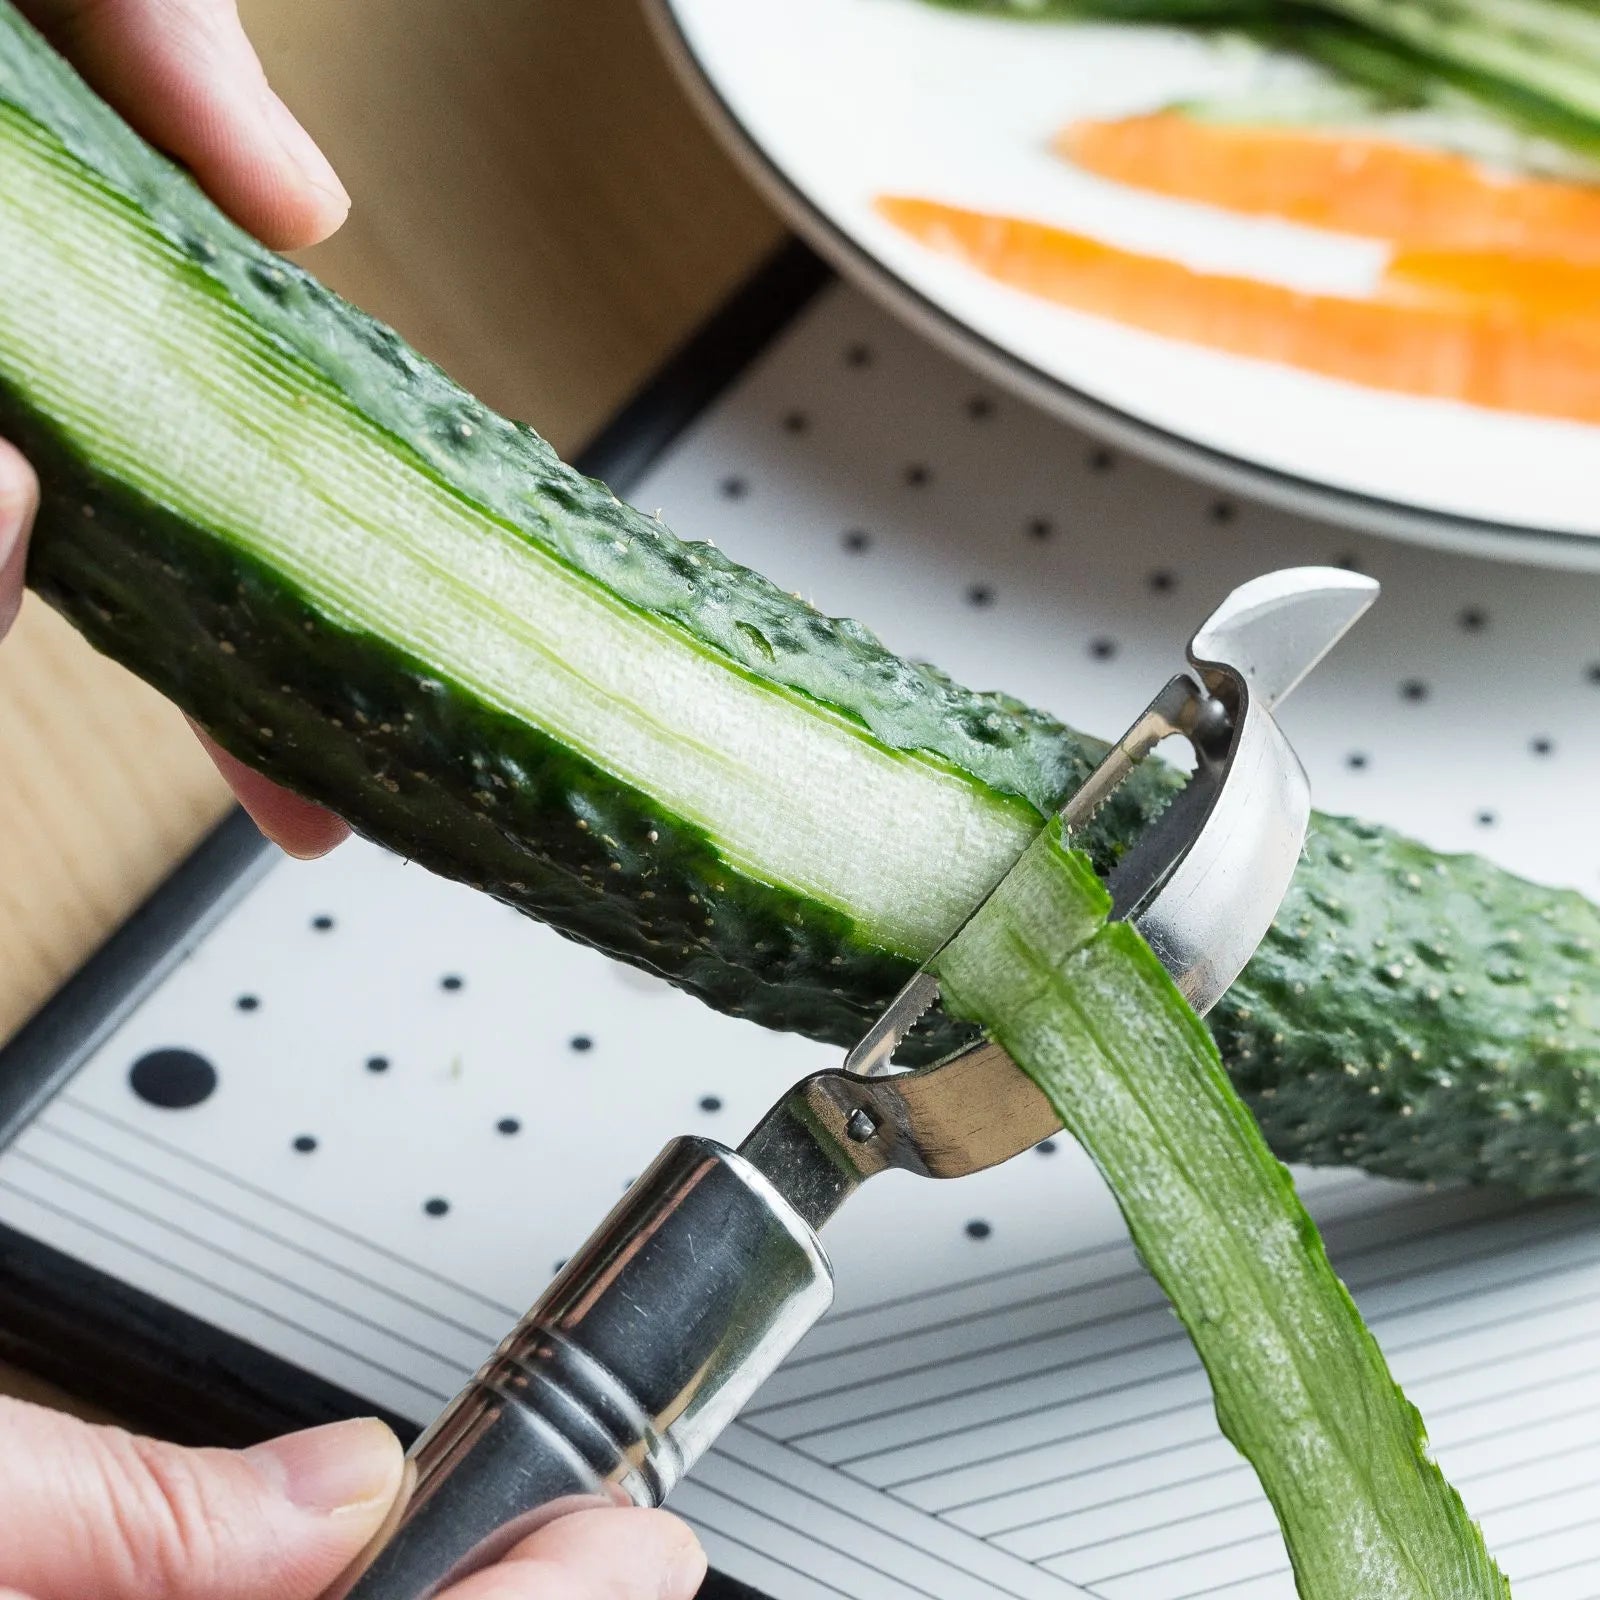 New Stainless Steel Vegetable Peeler Multi-Function Julienne Potato Cucumber Carrot Grater Fruit Cutter For Kitchen Gadgets Tool